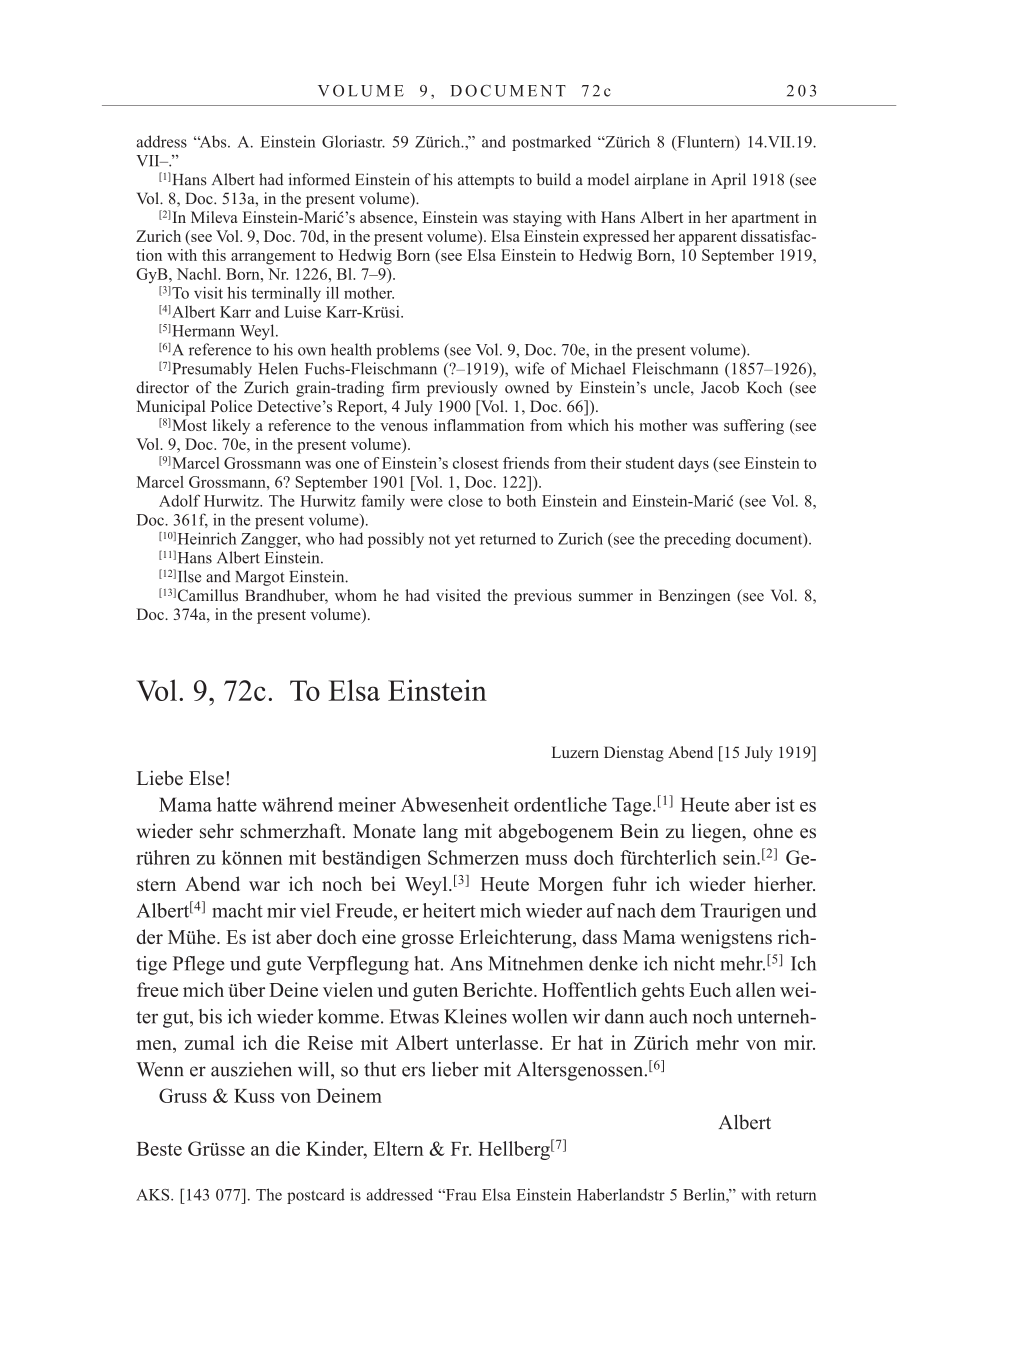 Volume 10: The Berlin Years: Correspondence May-December 1920 / Supplementary Correspondence 1909-1920 page 203